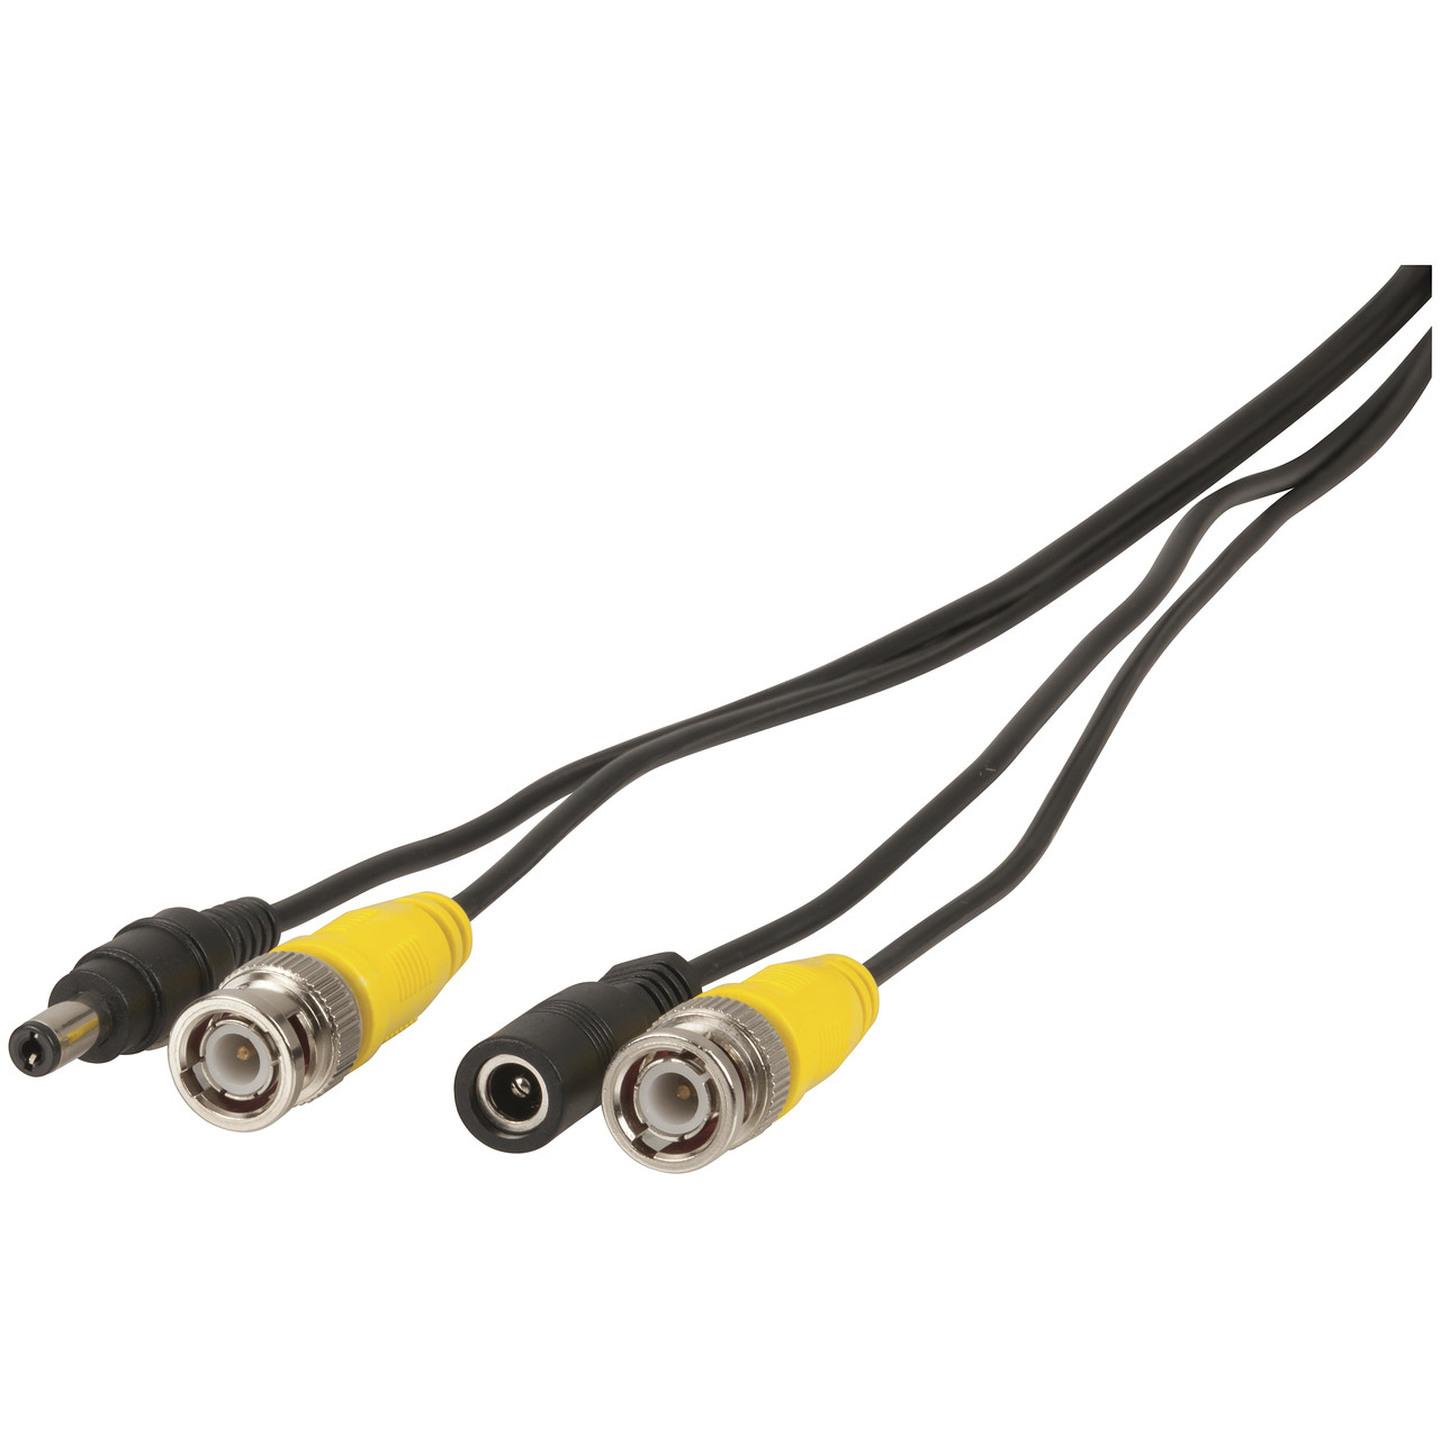 30m Video and Power Extension Cable